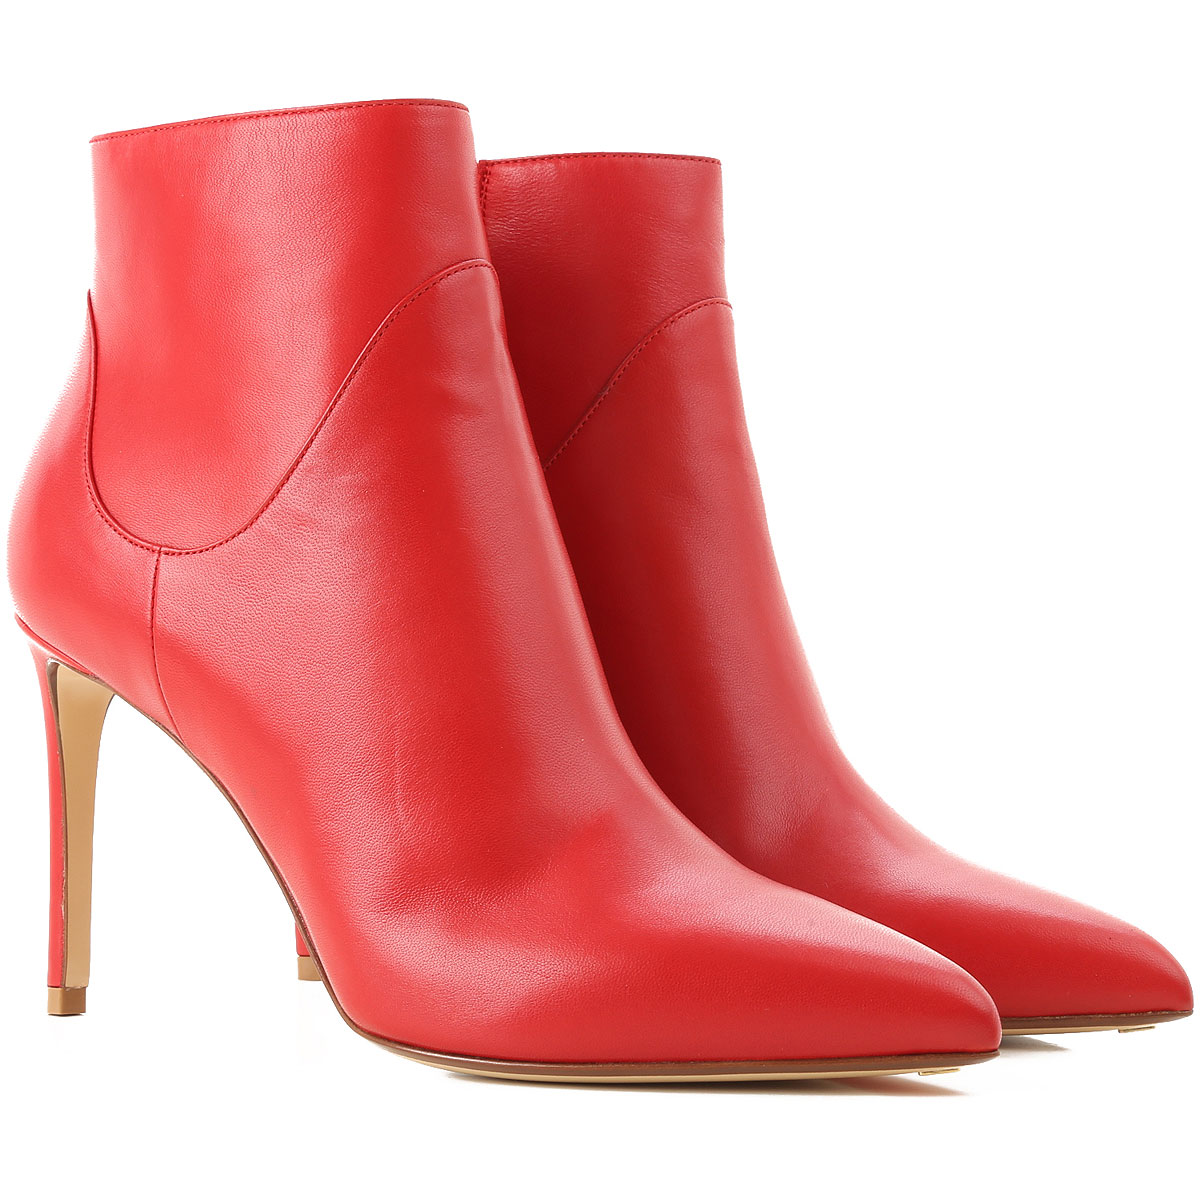 Womens Shoes Francesco Russo, Style code: r1b293-212-red